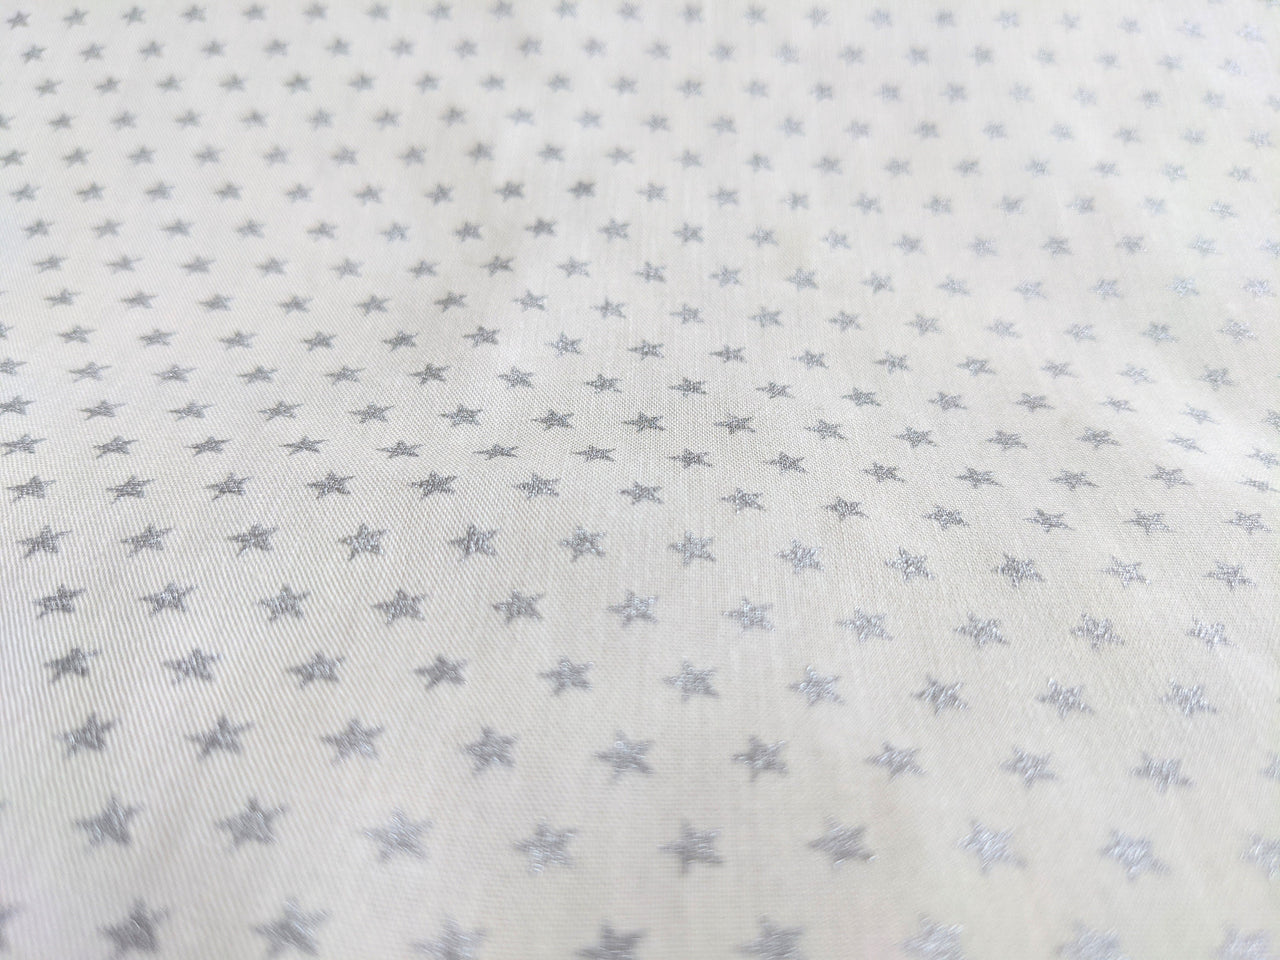 White Cotton Poplin Fabric With Silver Stars Christmas Fabric, Festive Fabric, Holiday Fabric